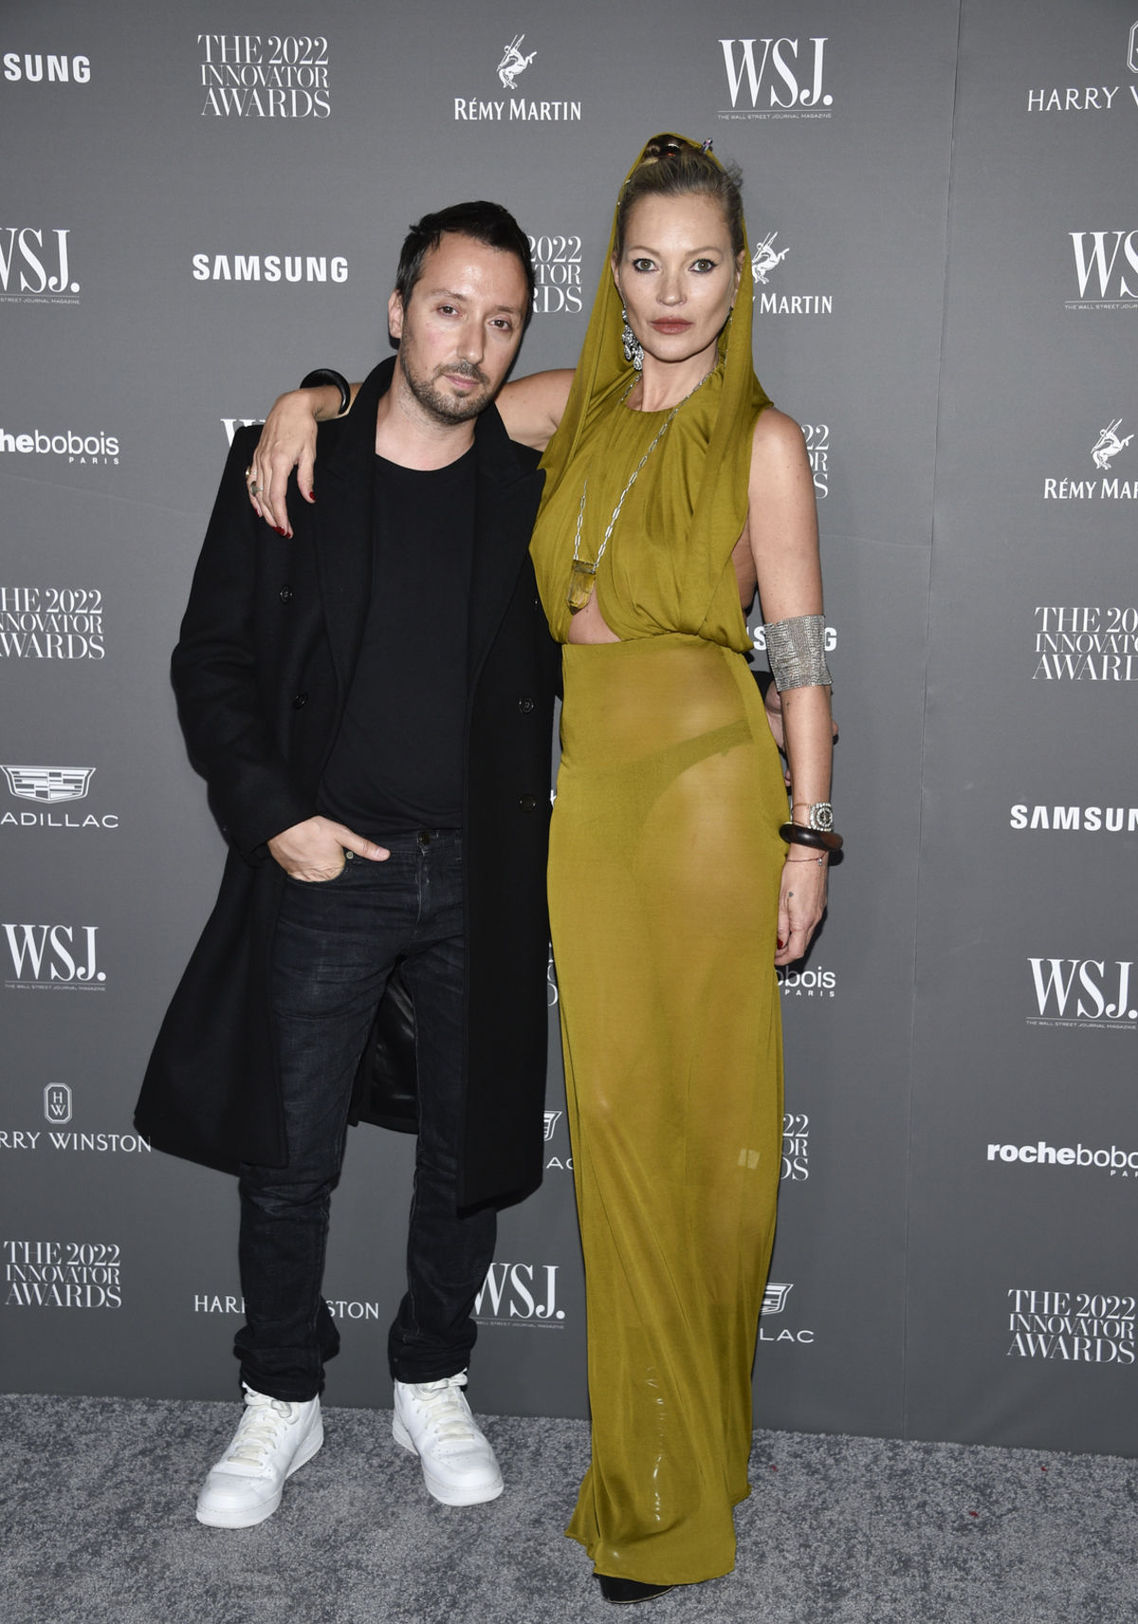 Anthony Vaccarello a Kate Moss